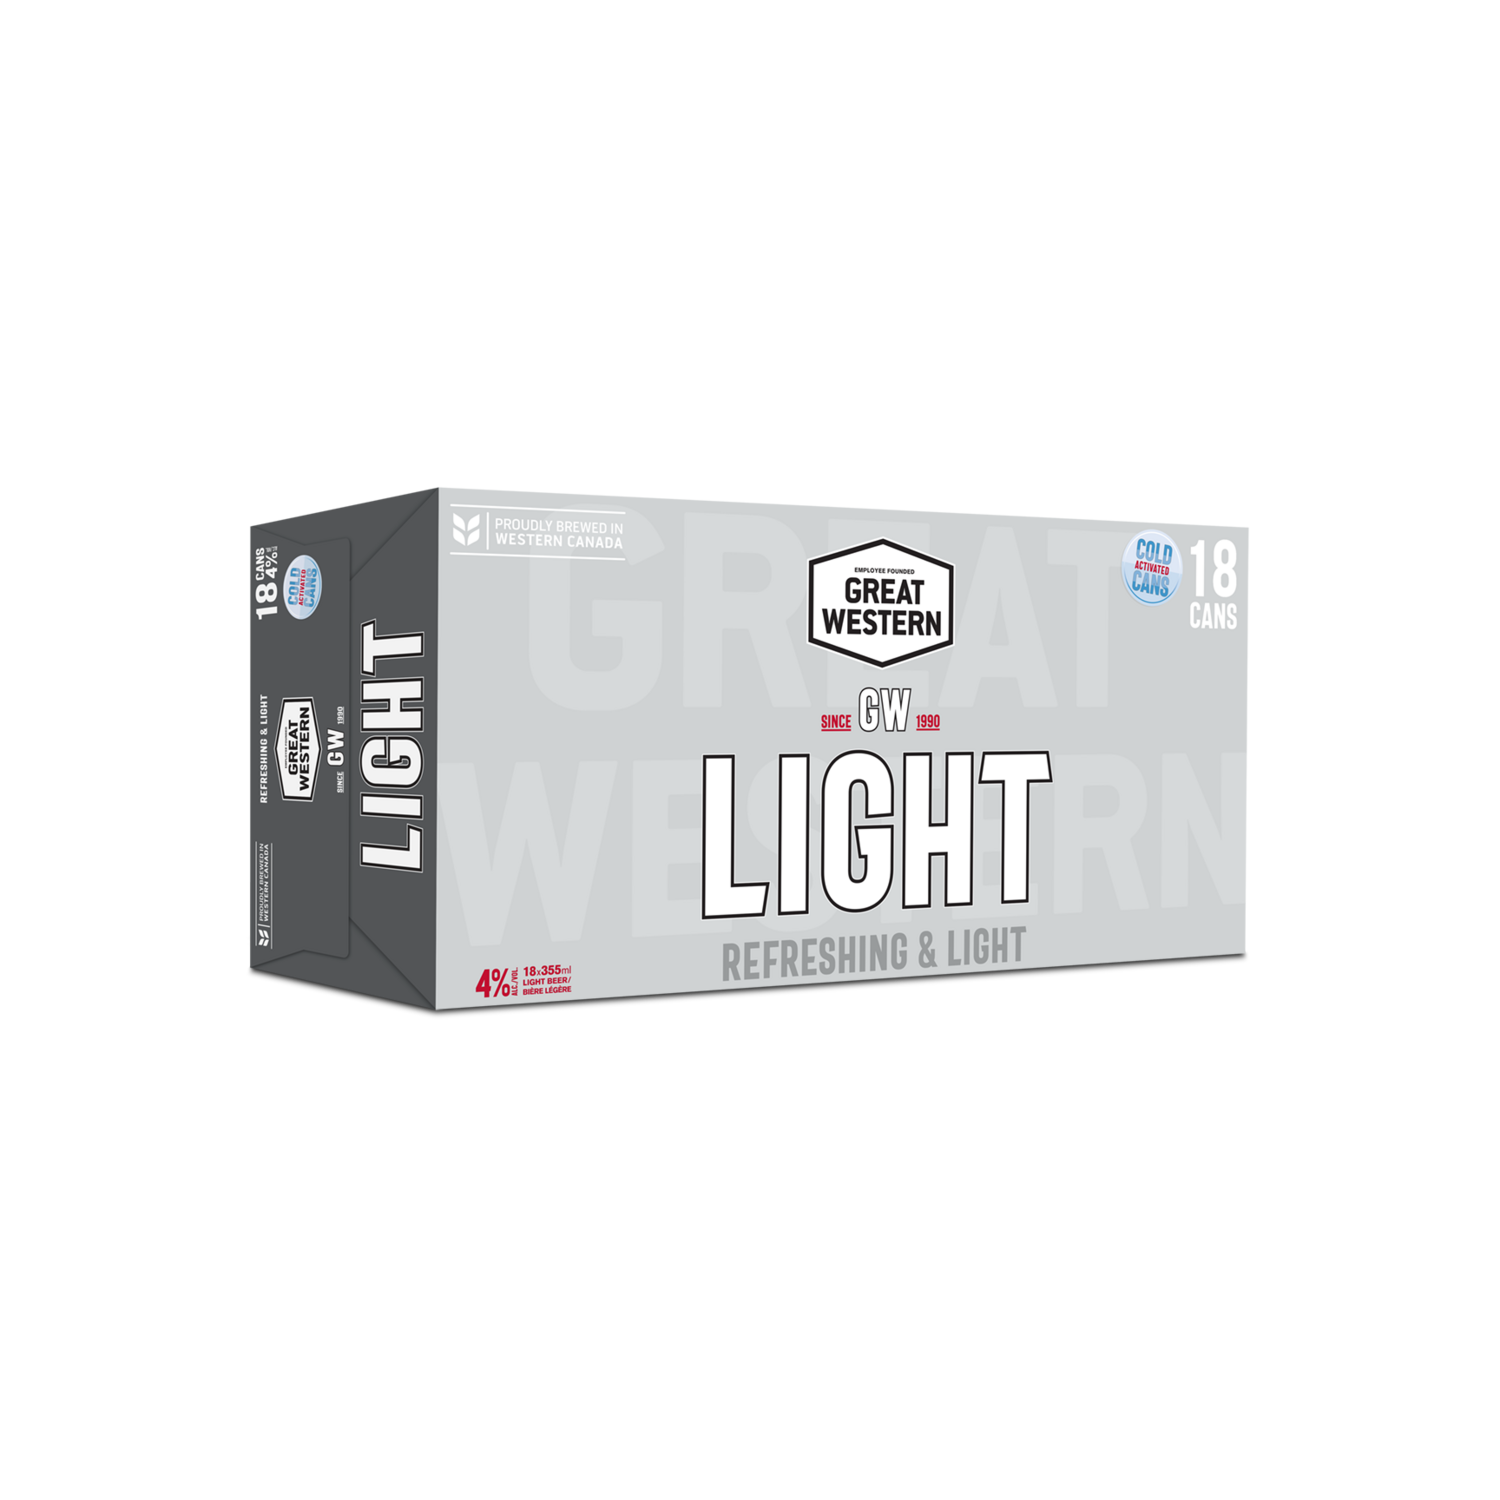 GREAT WESTERN LIGHT, Size: 18 Cans